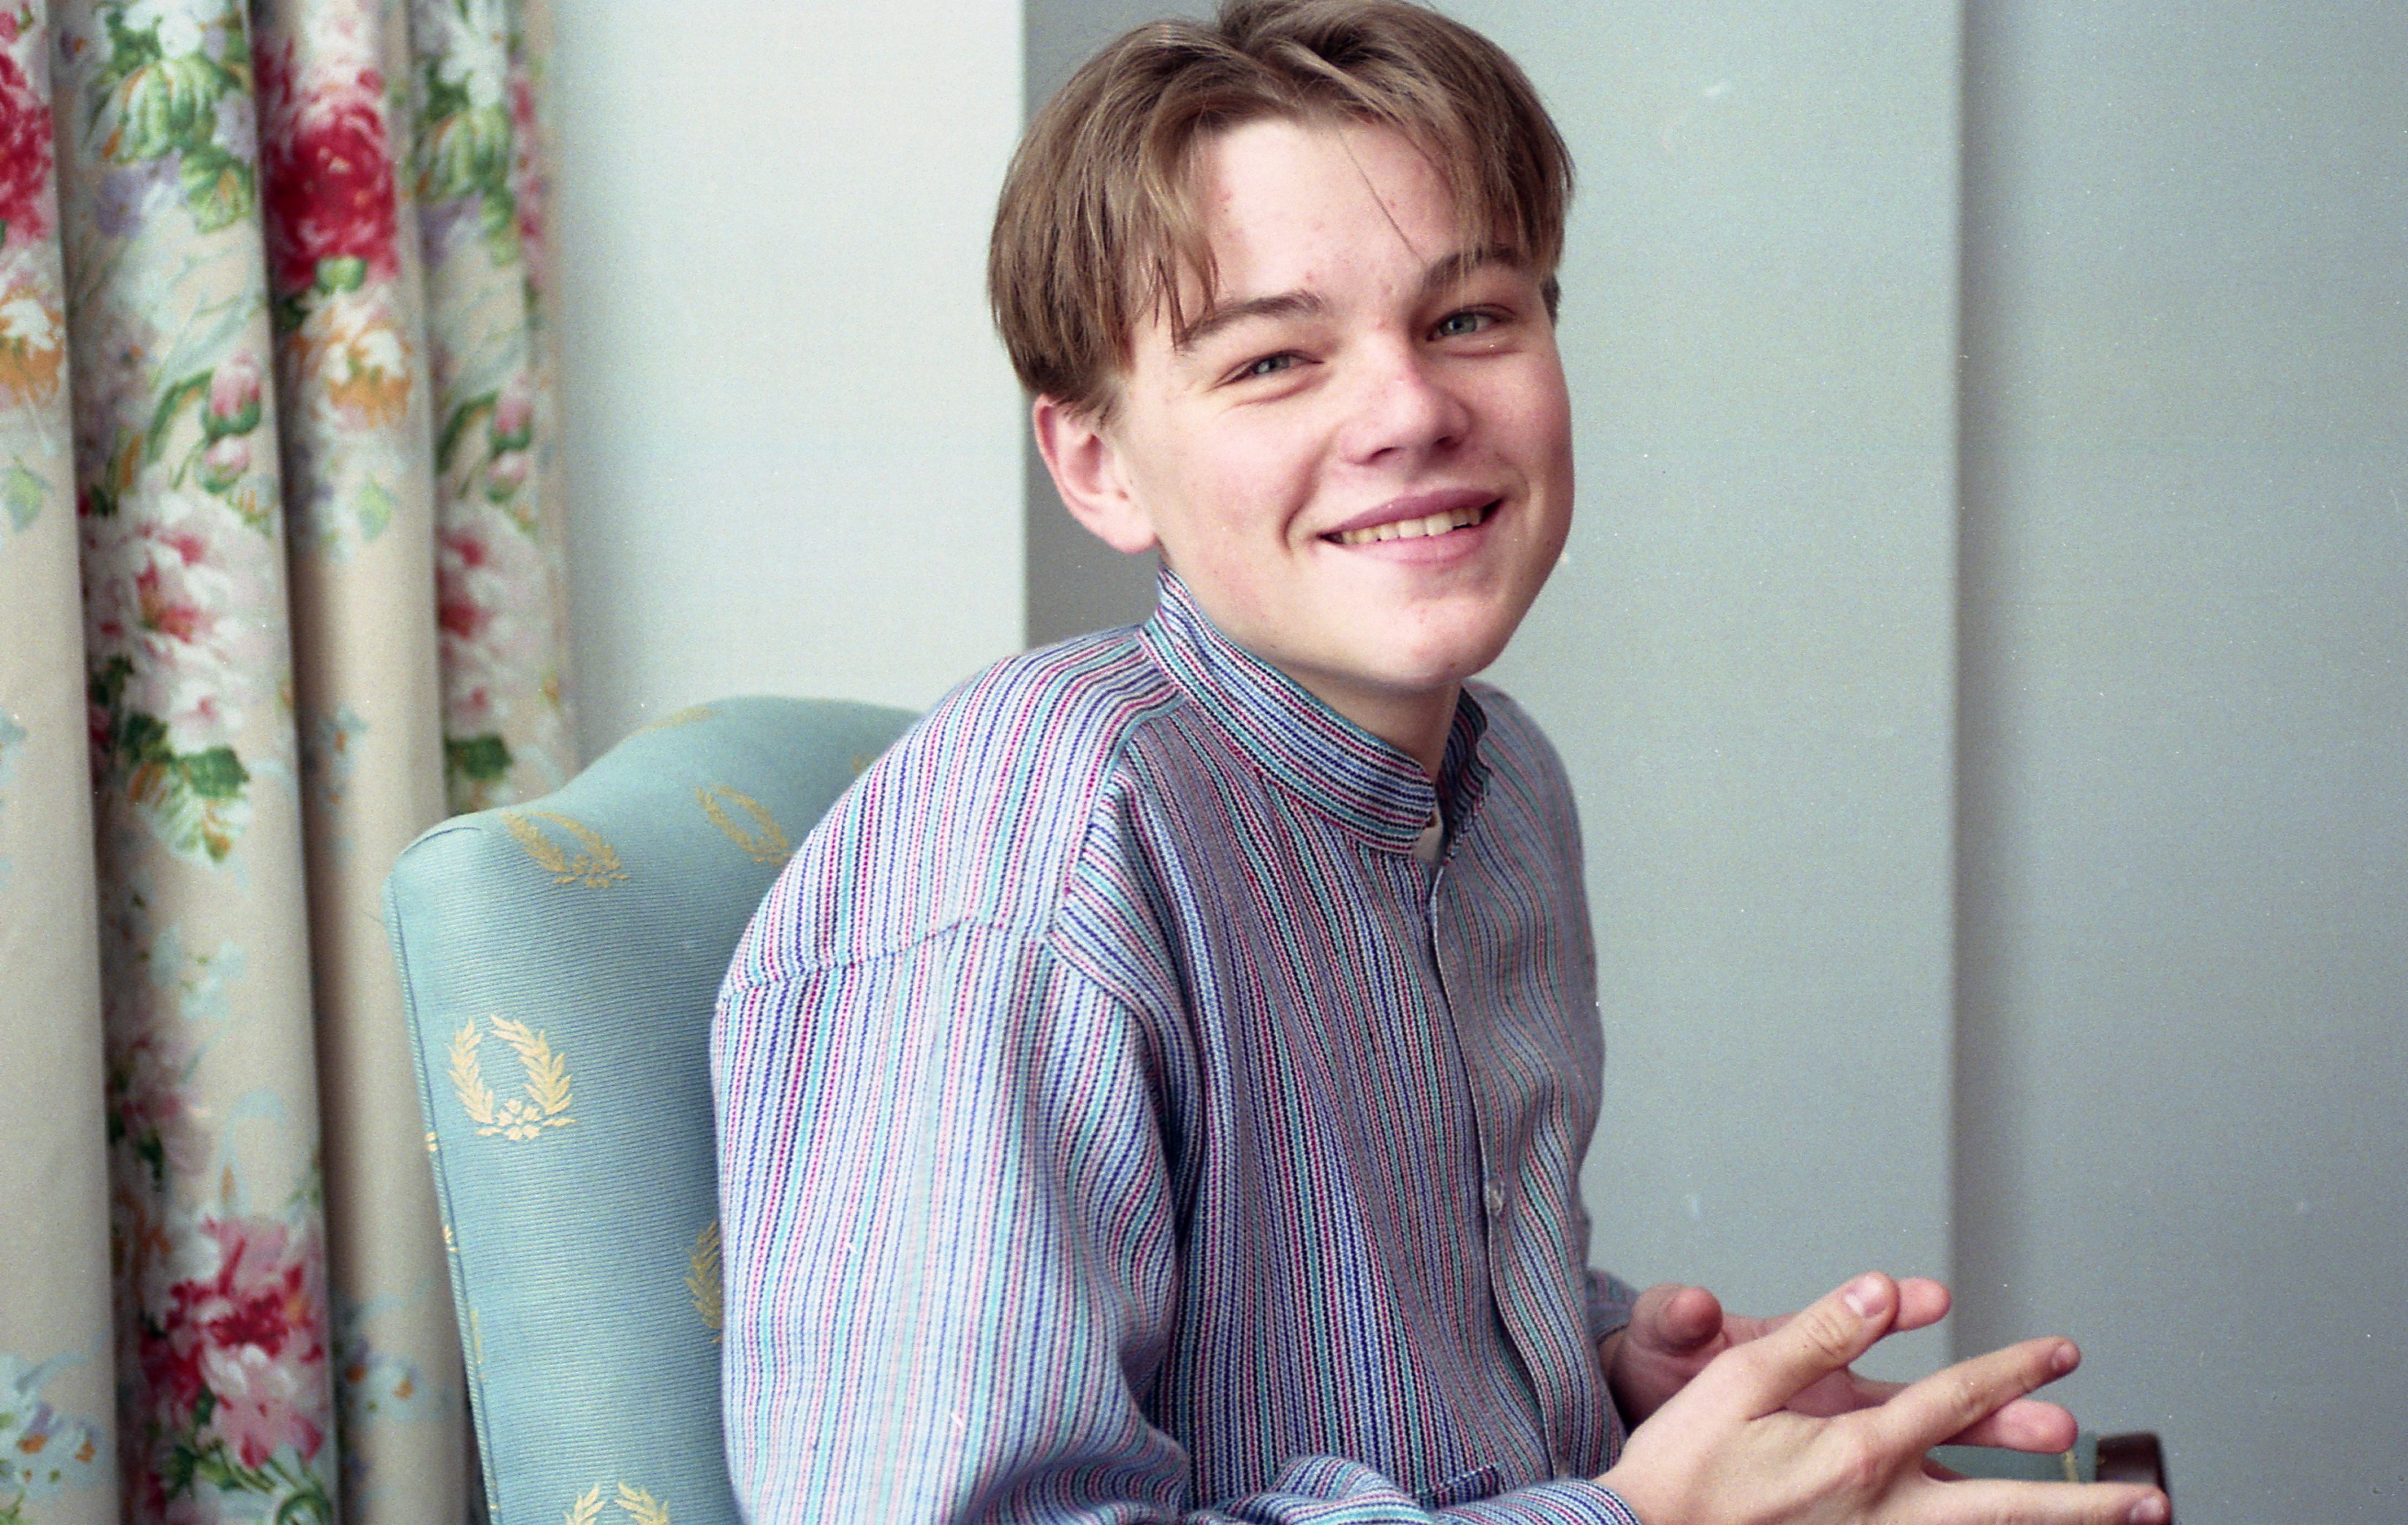 Leonardo DiCaprio sitting in a chair at age 17 